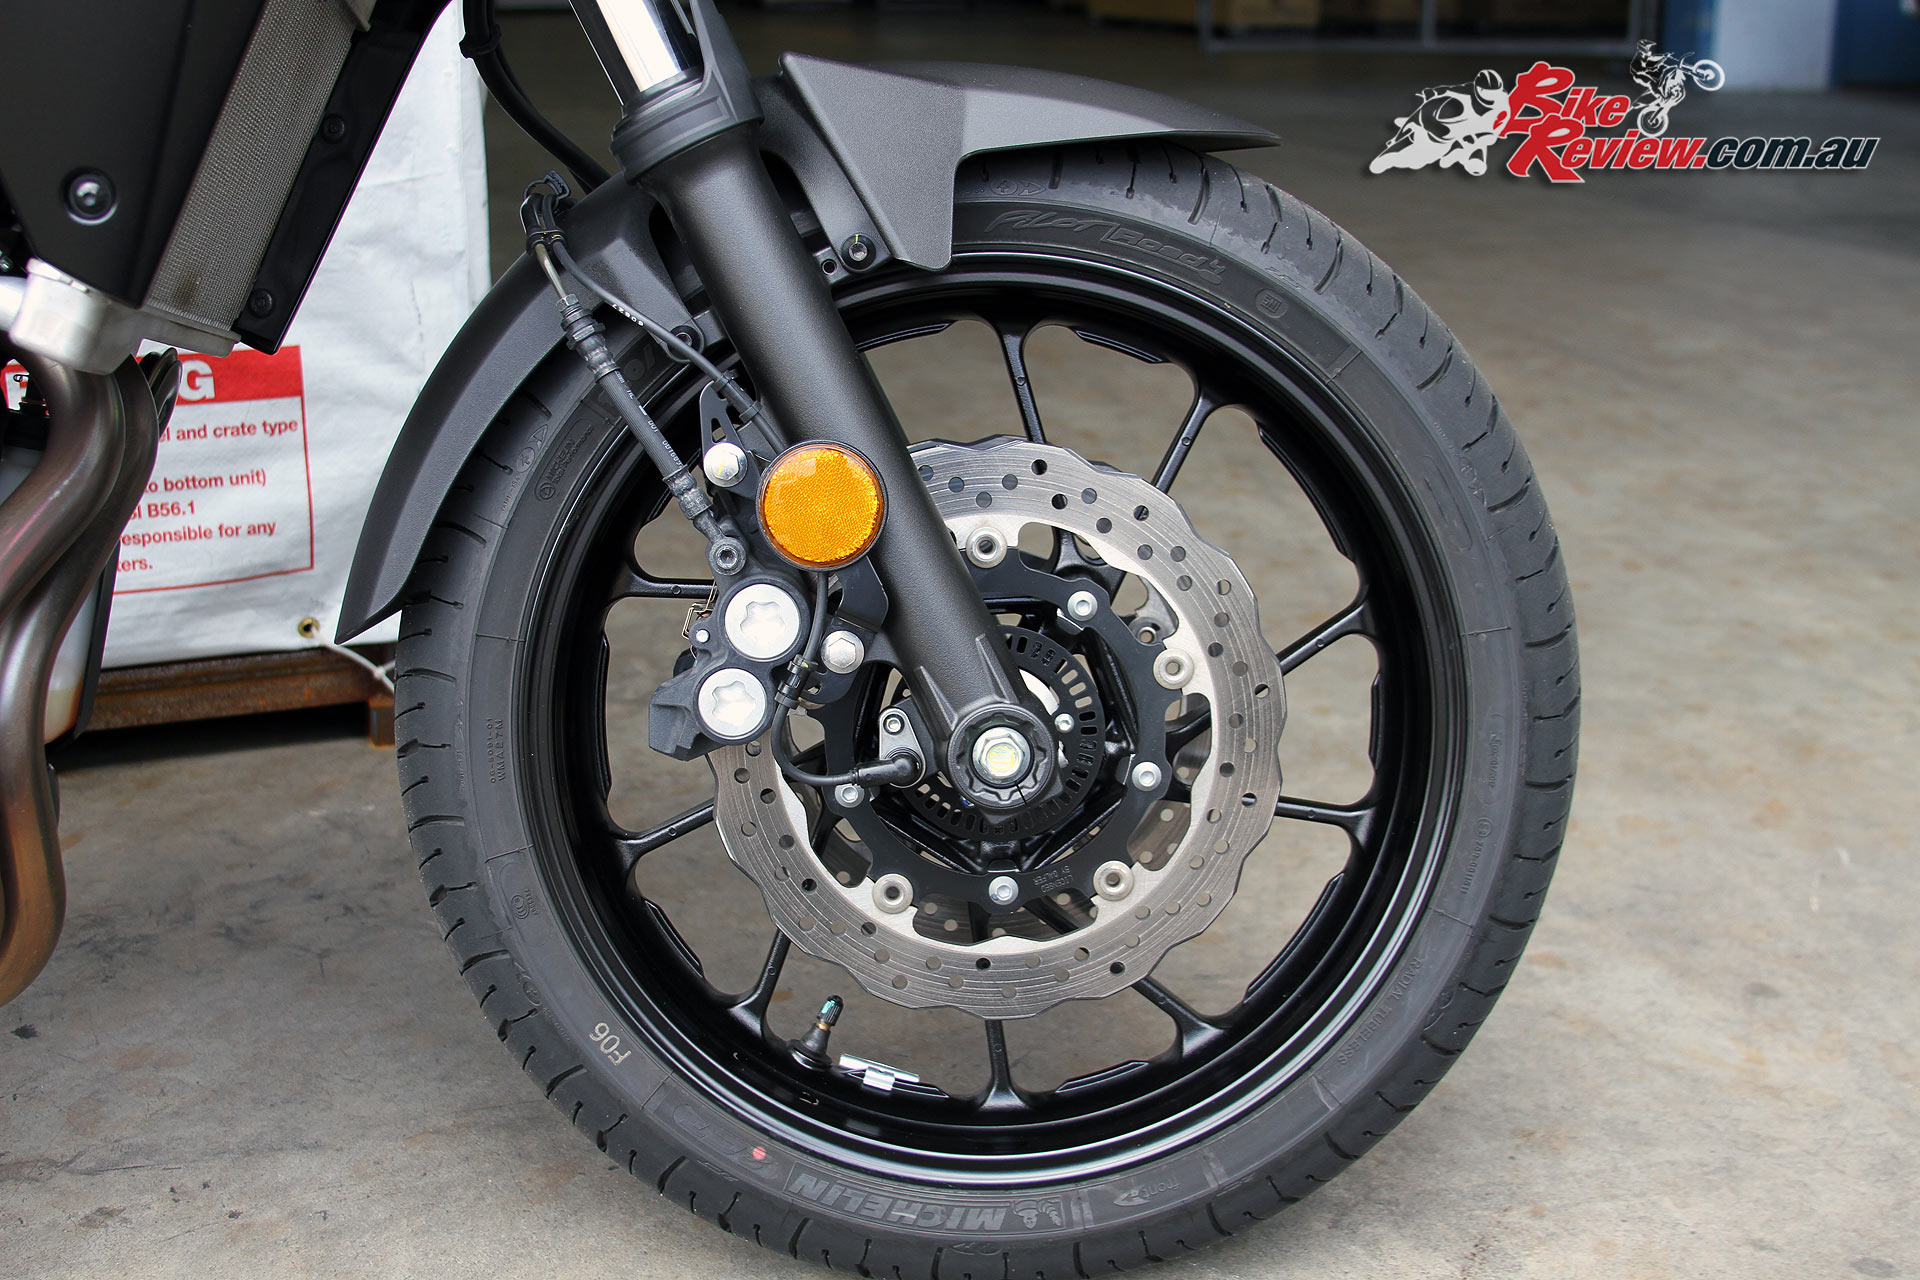 Dual front discs with four-piston calipers are backed up by ABS on the MT-07 Tracer.